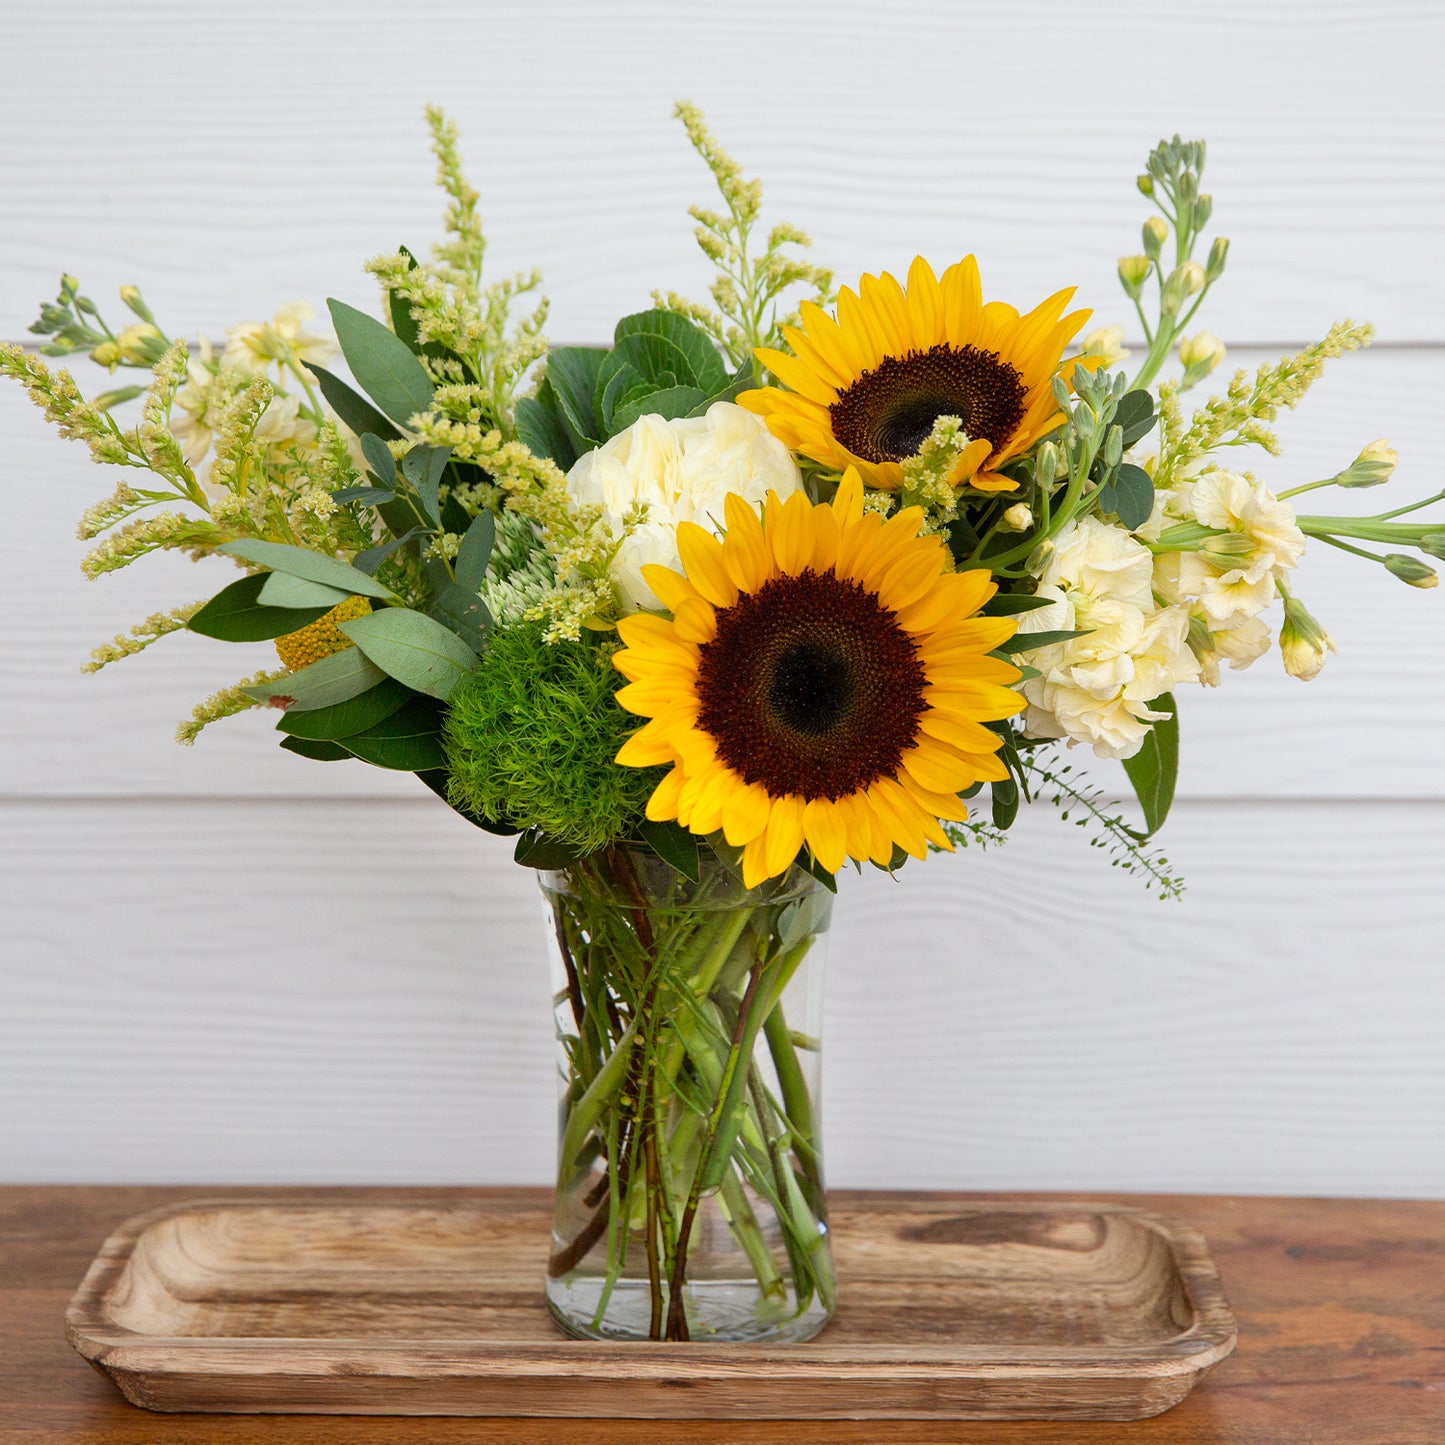 Vibrant bouquet featuring bright sunflowers, white roses, and lush greenery arranged in a clear prism vase, set upon a wooden tray, creating a cheerful display for any interior space, available at 46spruce.com.